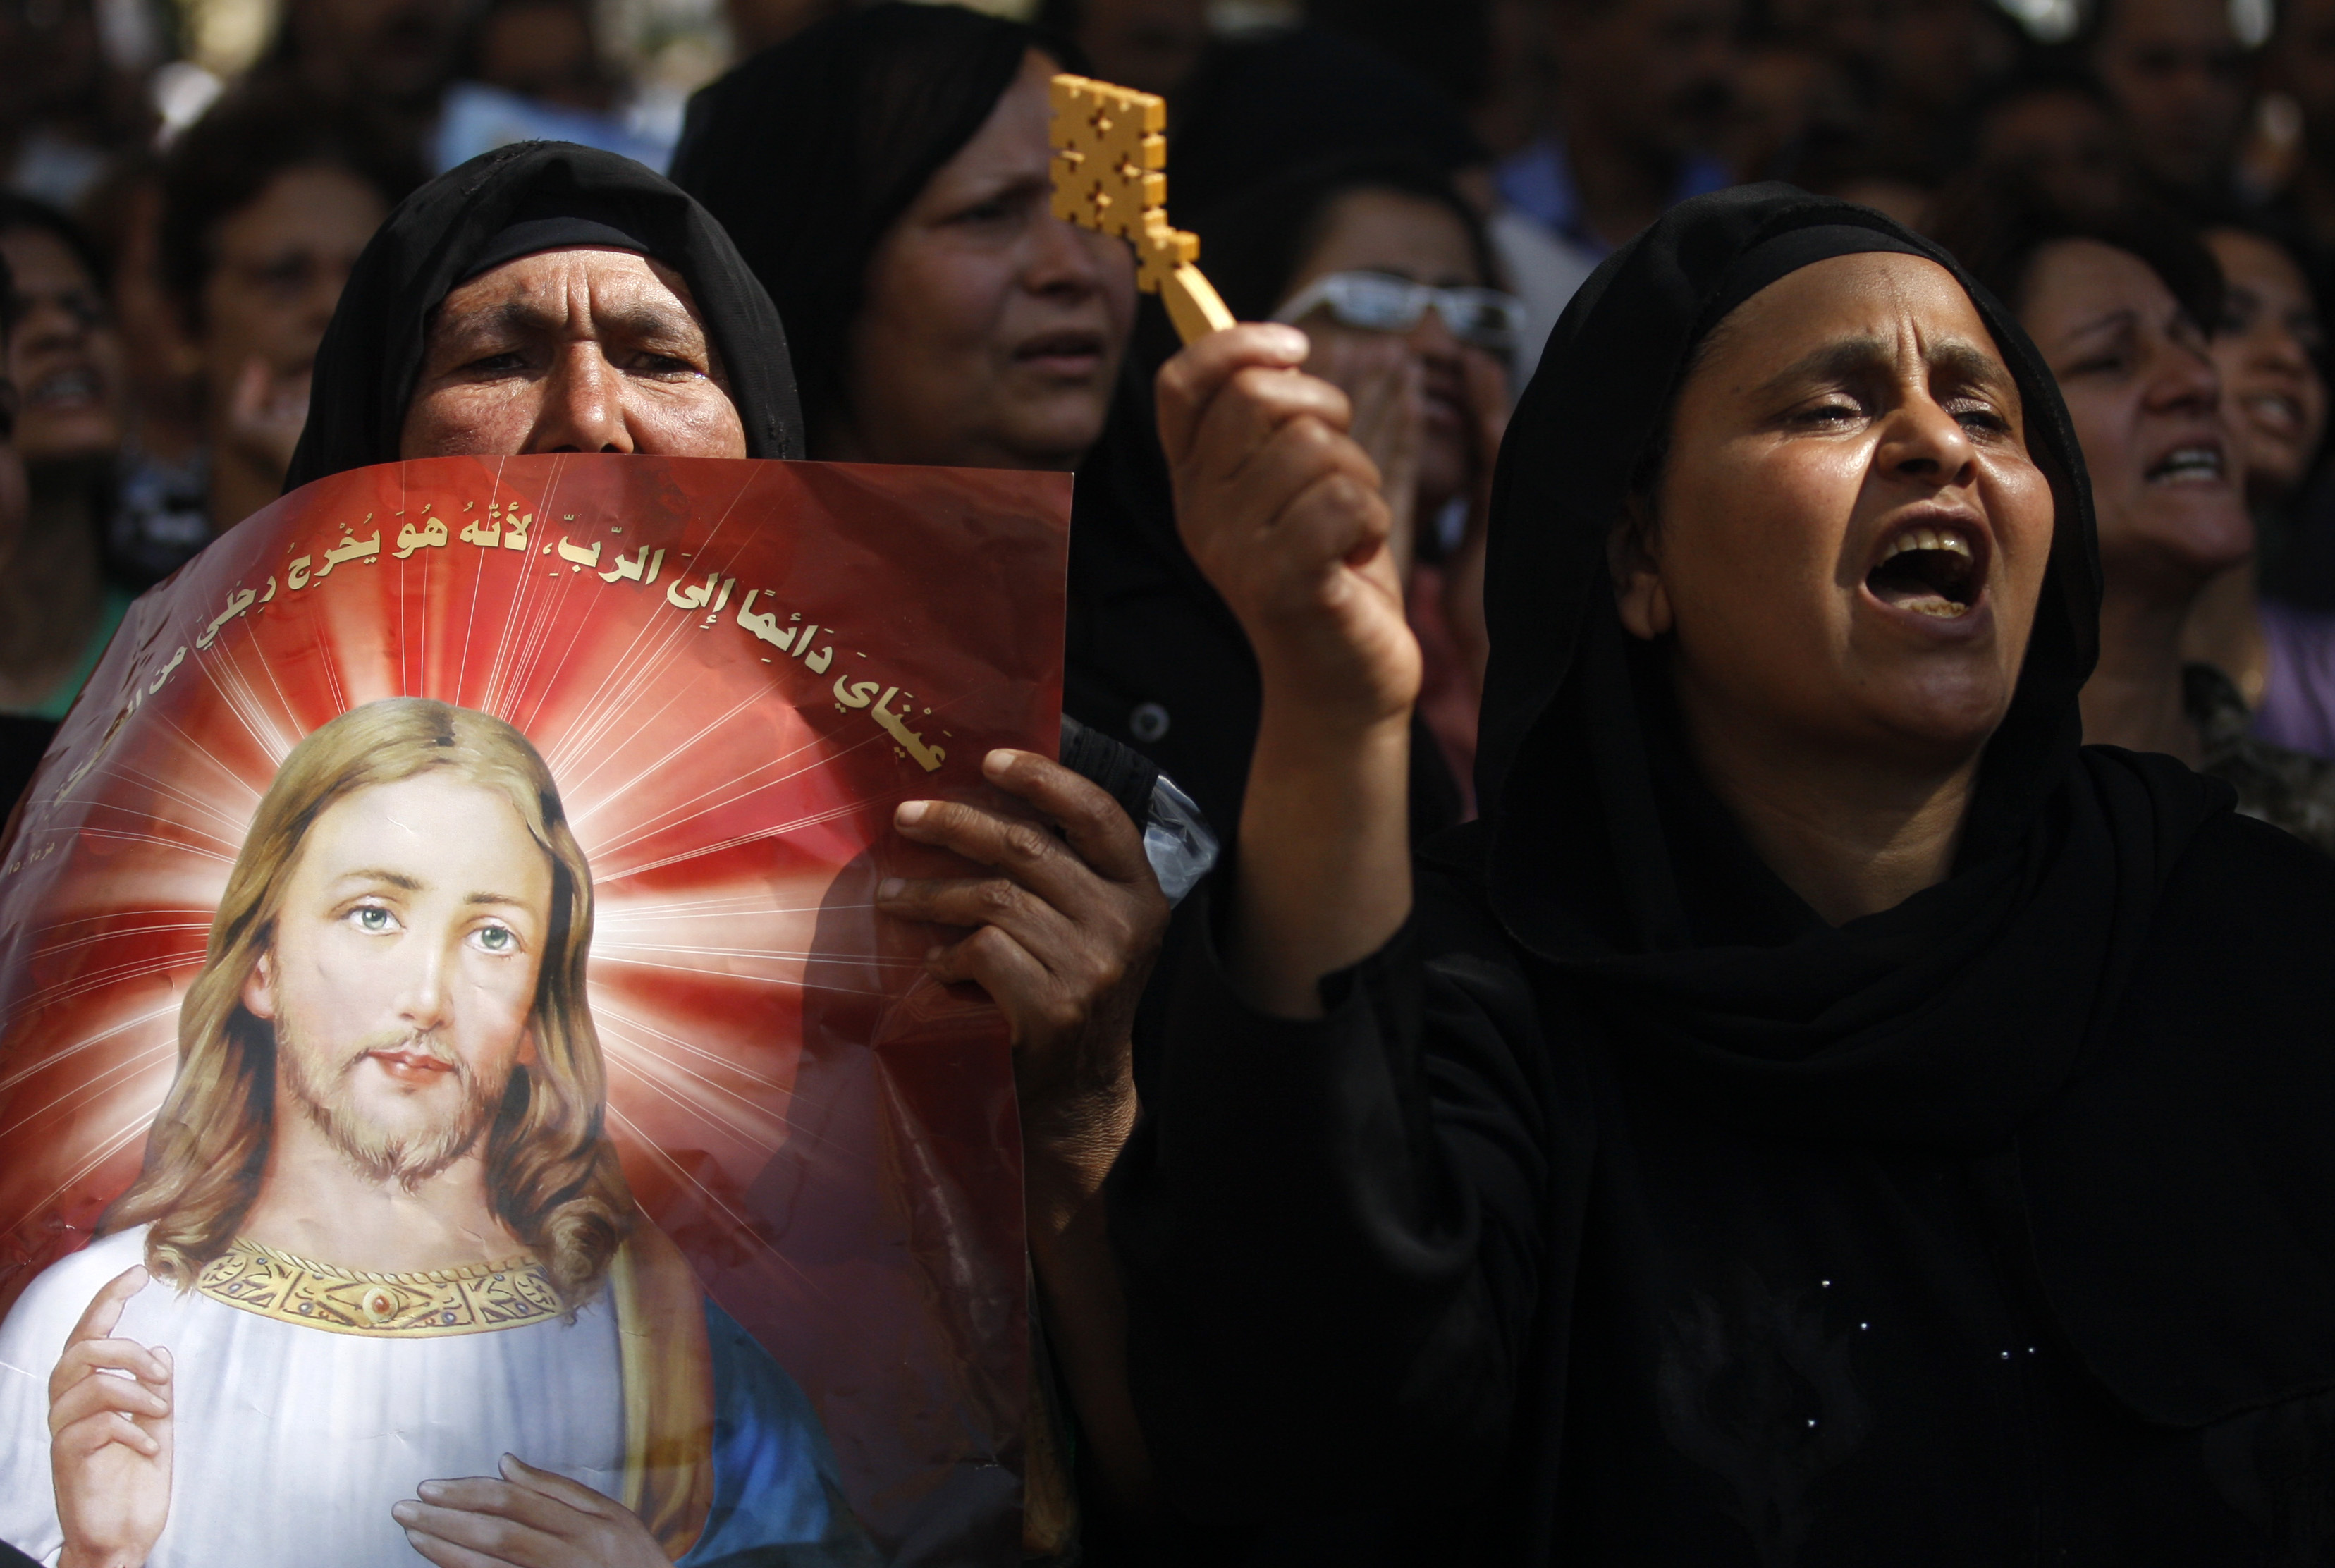 The photo captures a moment on Monday, May 9, 2011, as Egyptian Coptic Christians passionately chant angry slogans while protesting recent attacks on Christians and churches, in front of the state television building in Cairo, Egypt. (AP photo/Khalil Hamra, File)